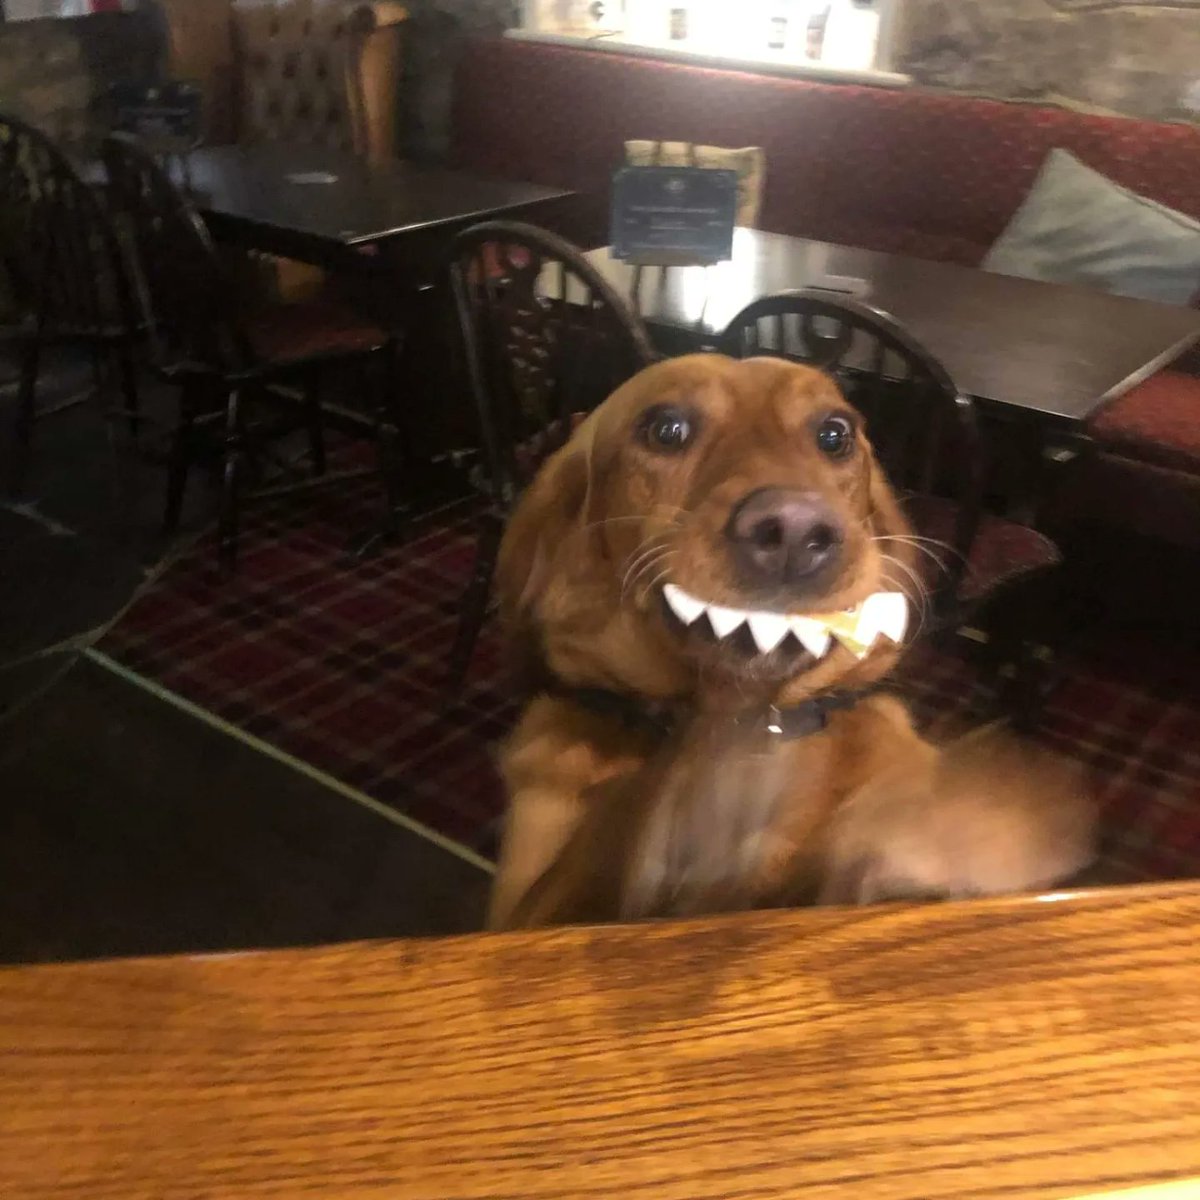 Nice cheesy smile from Trigger when trying to get served at the bar in the @thedownearms a couple of weeks ago. He must think he'll get preferential treatment with that beam😬😁 #stonybrokecottage #Castleton #countrypubs #dogfriendly #happydogs #roaringfire